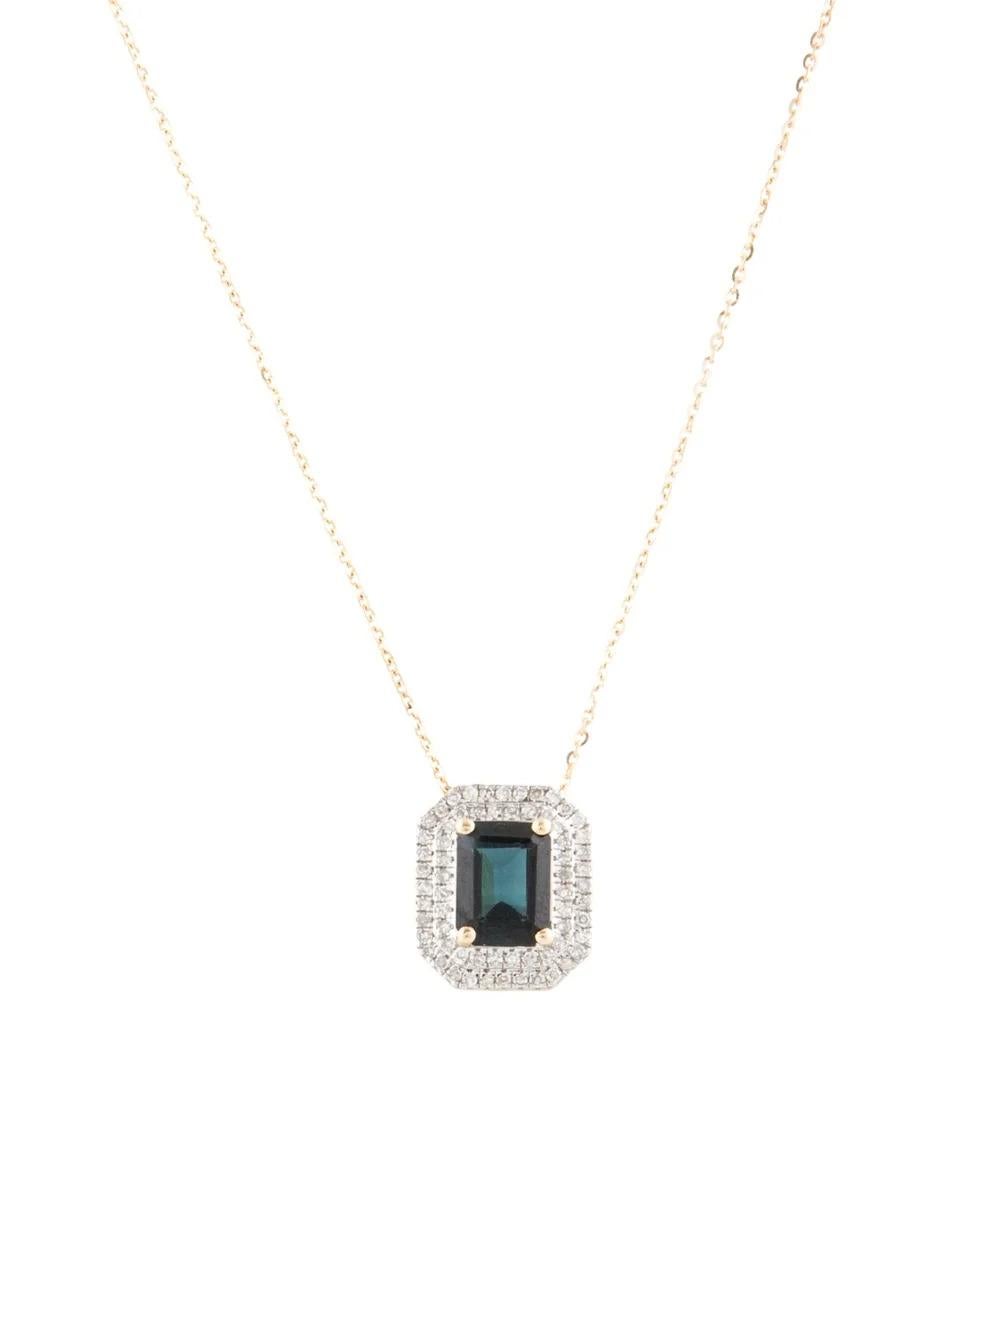 Elevate your style with this exquisite 14K Yellow Gold Pendant Necklace, featuring a captivating 1.36 Carat Emerald Cut Tourmaline and 0.27 Carats of shimmering Diamonds.

Specifications:

* Metal Type: 14K Yellow Gold
* Length: Adjustable from 16